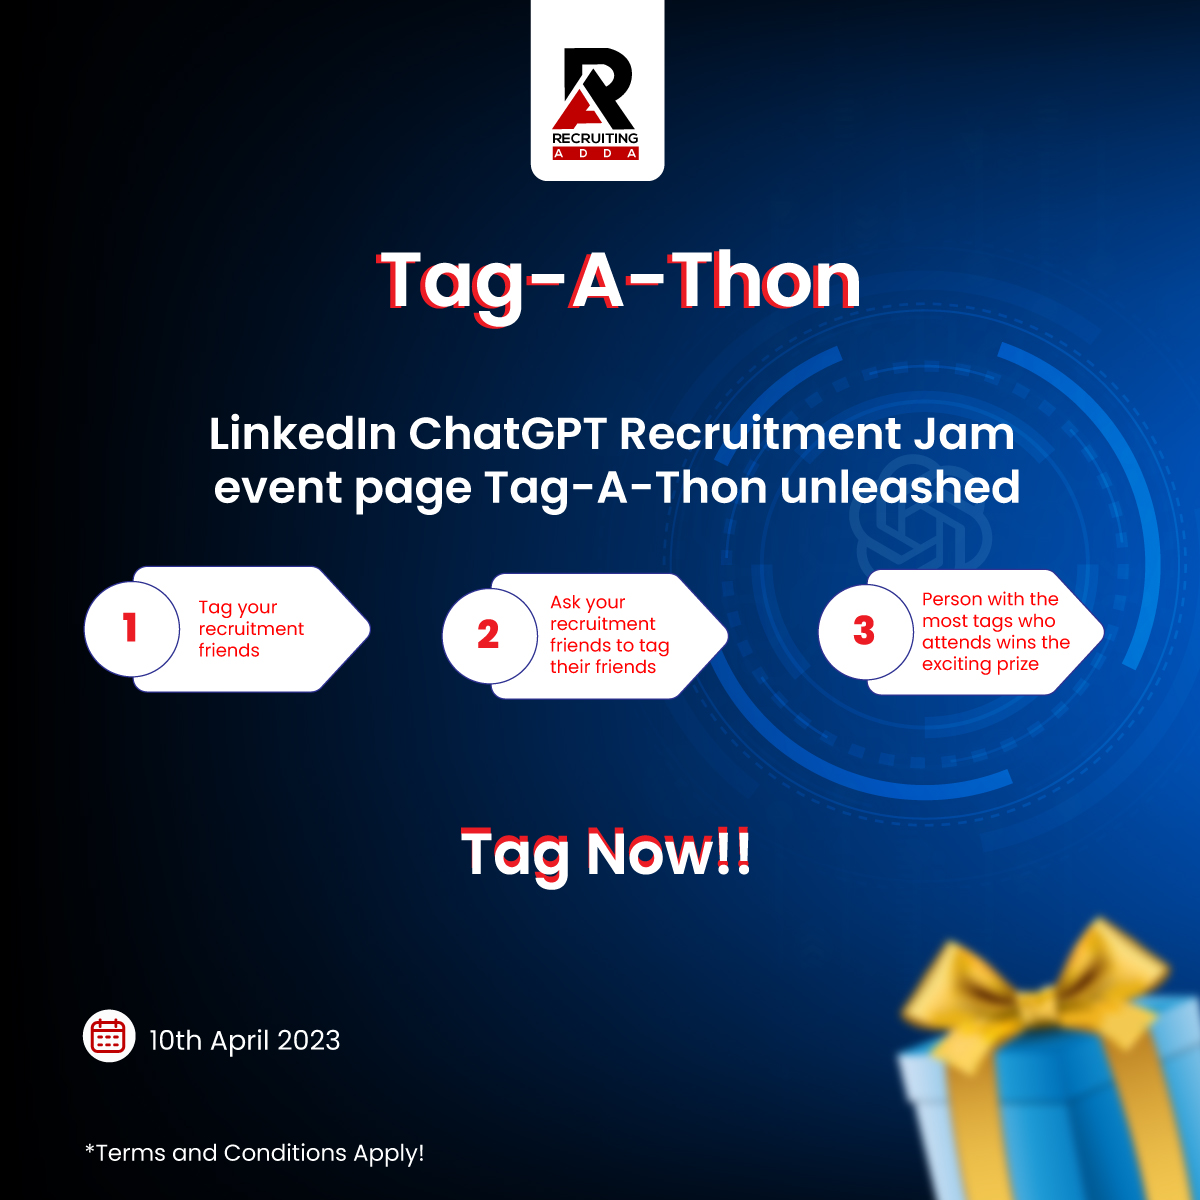 Let’s tag our recruitment colleagues & friends on the LinkedIn ChatGPT Recruitment Jam event page to participate in the Tag-A-Thon.
Tag Now: bit.ly/3zFHfcl 

#tagathon #chatgpt #chatbots #RAChatGPTWebinar #recruitingadda #sourcingadda #recruitment2023 #communityevent